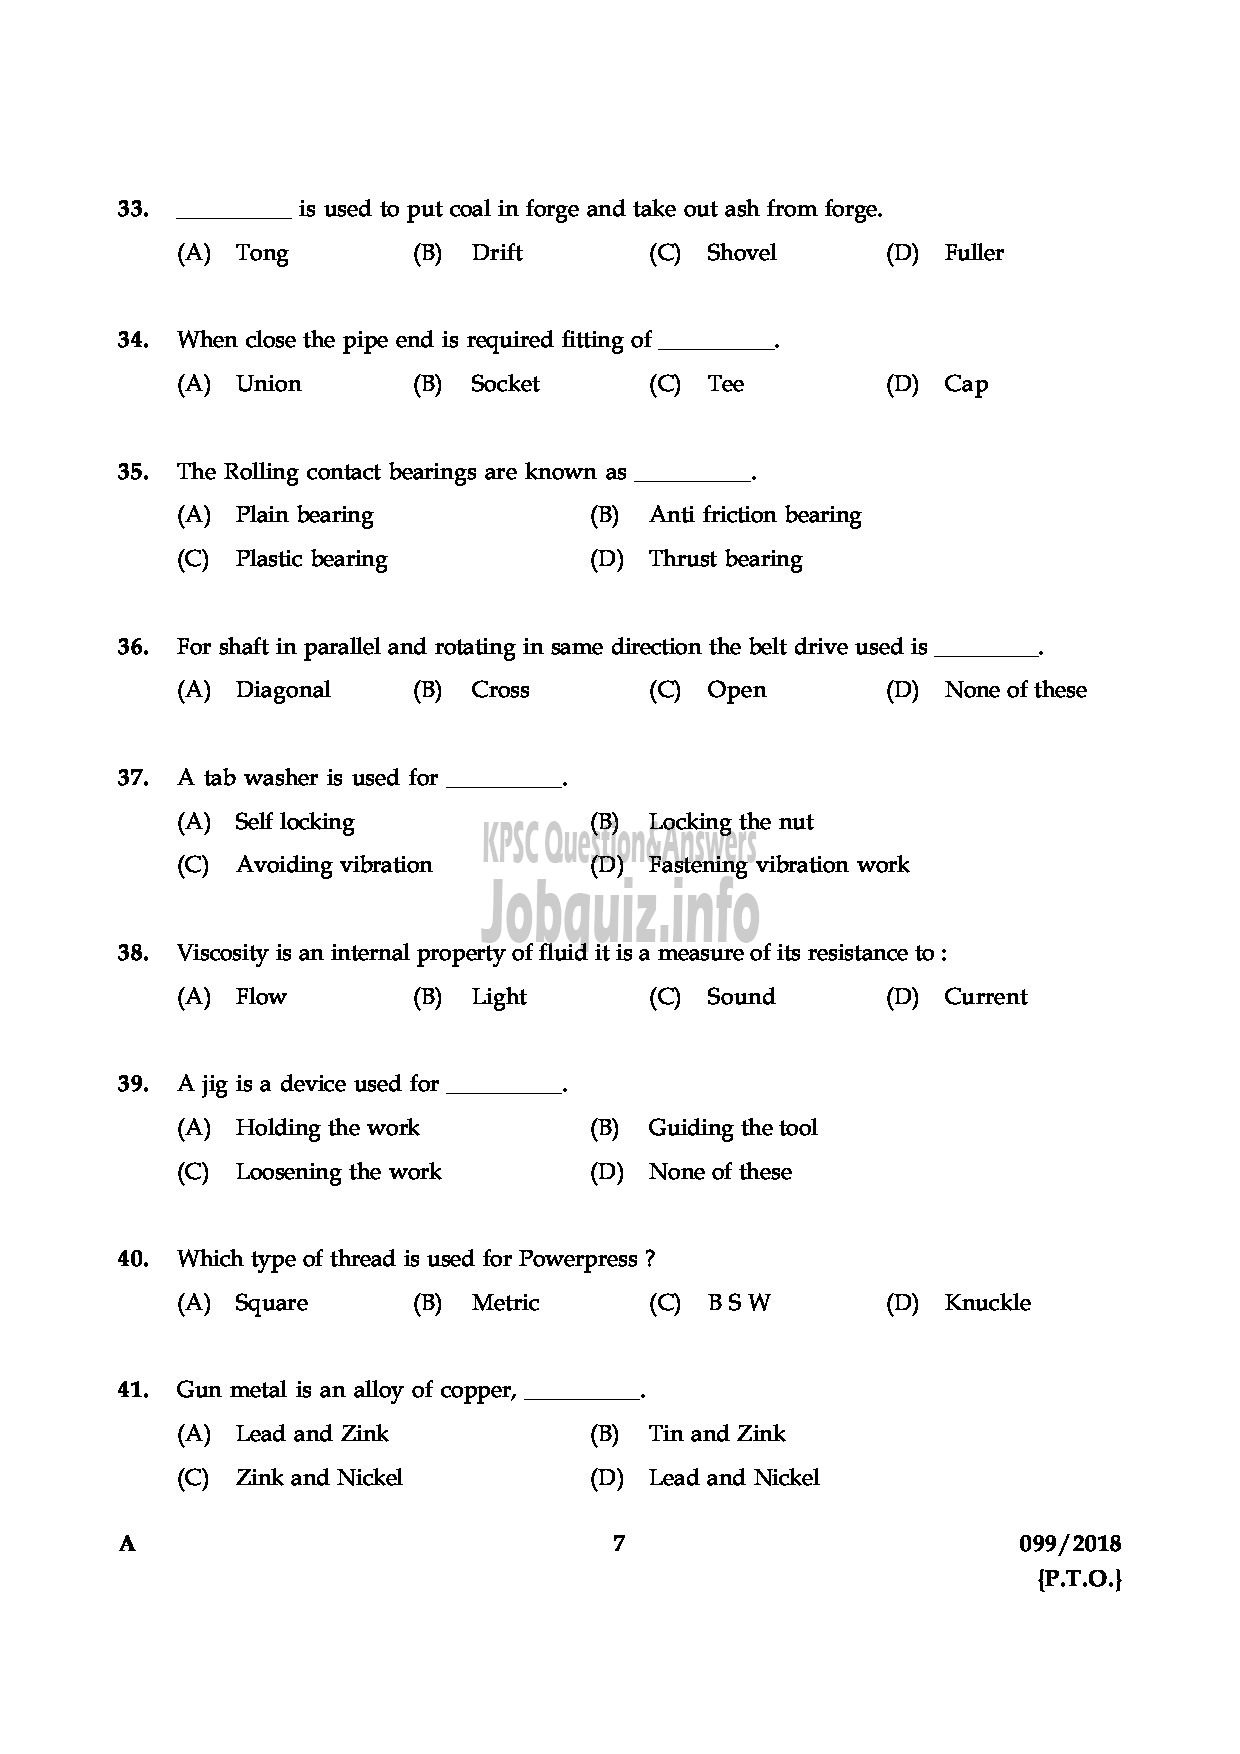 Kerala PSC Question Paper - JUNIOR INSTRUCTOR FITTER INDUSTRIAL TRAINING ENGLISH -7